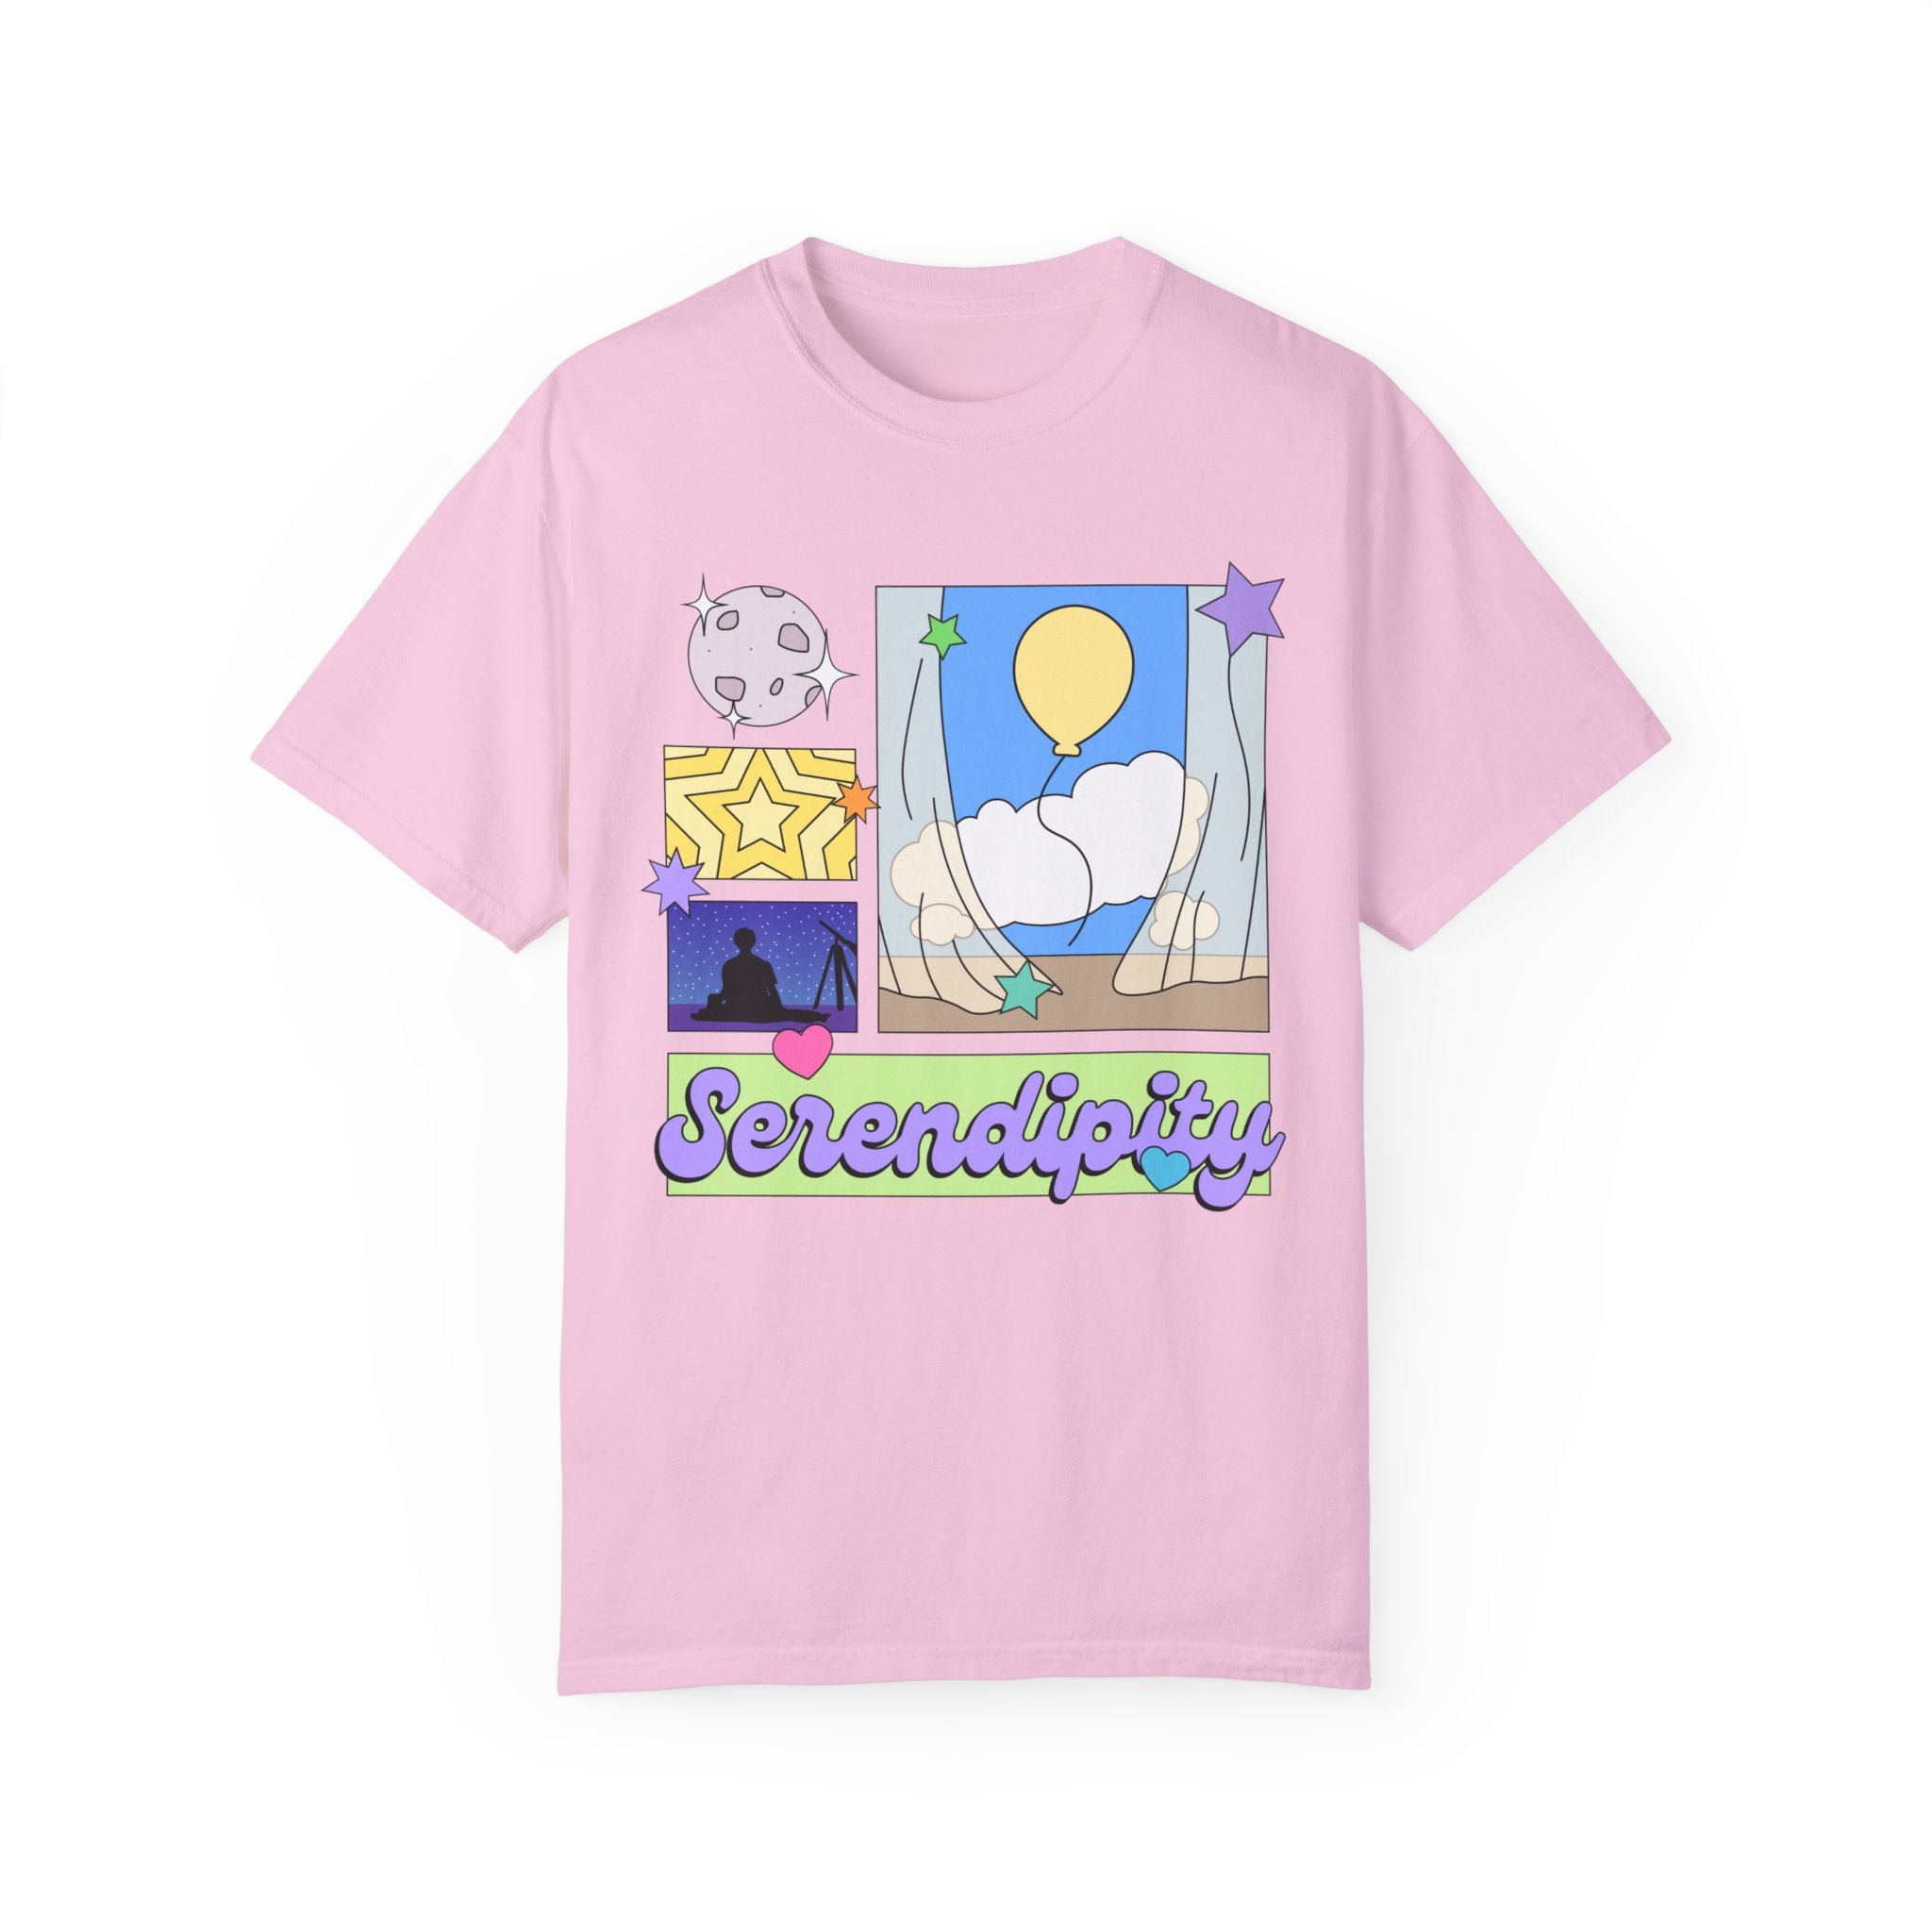 Serendipity Graphic Printed Garment-Dyed T-shirt